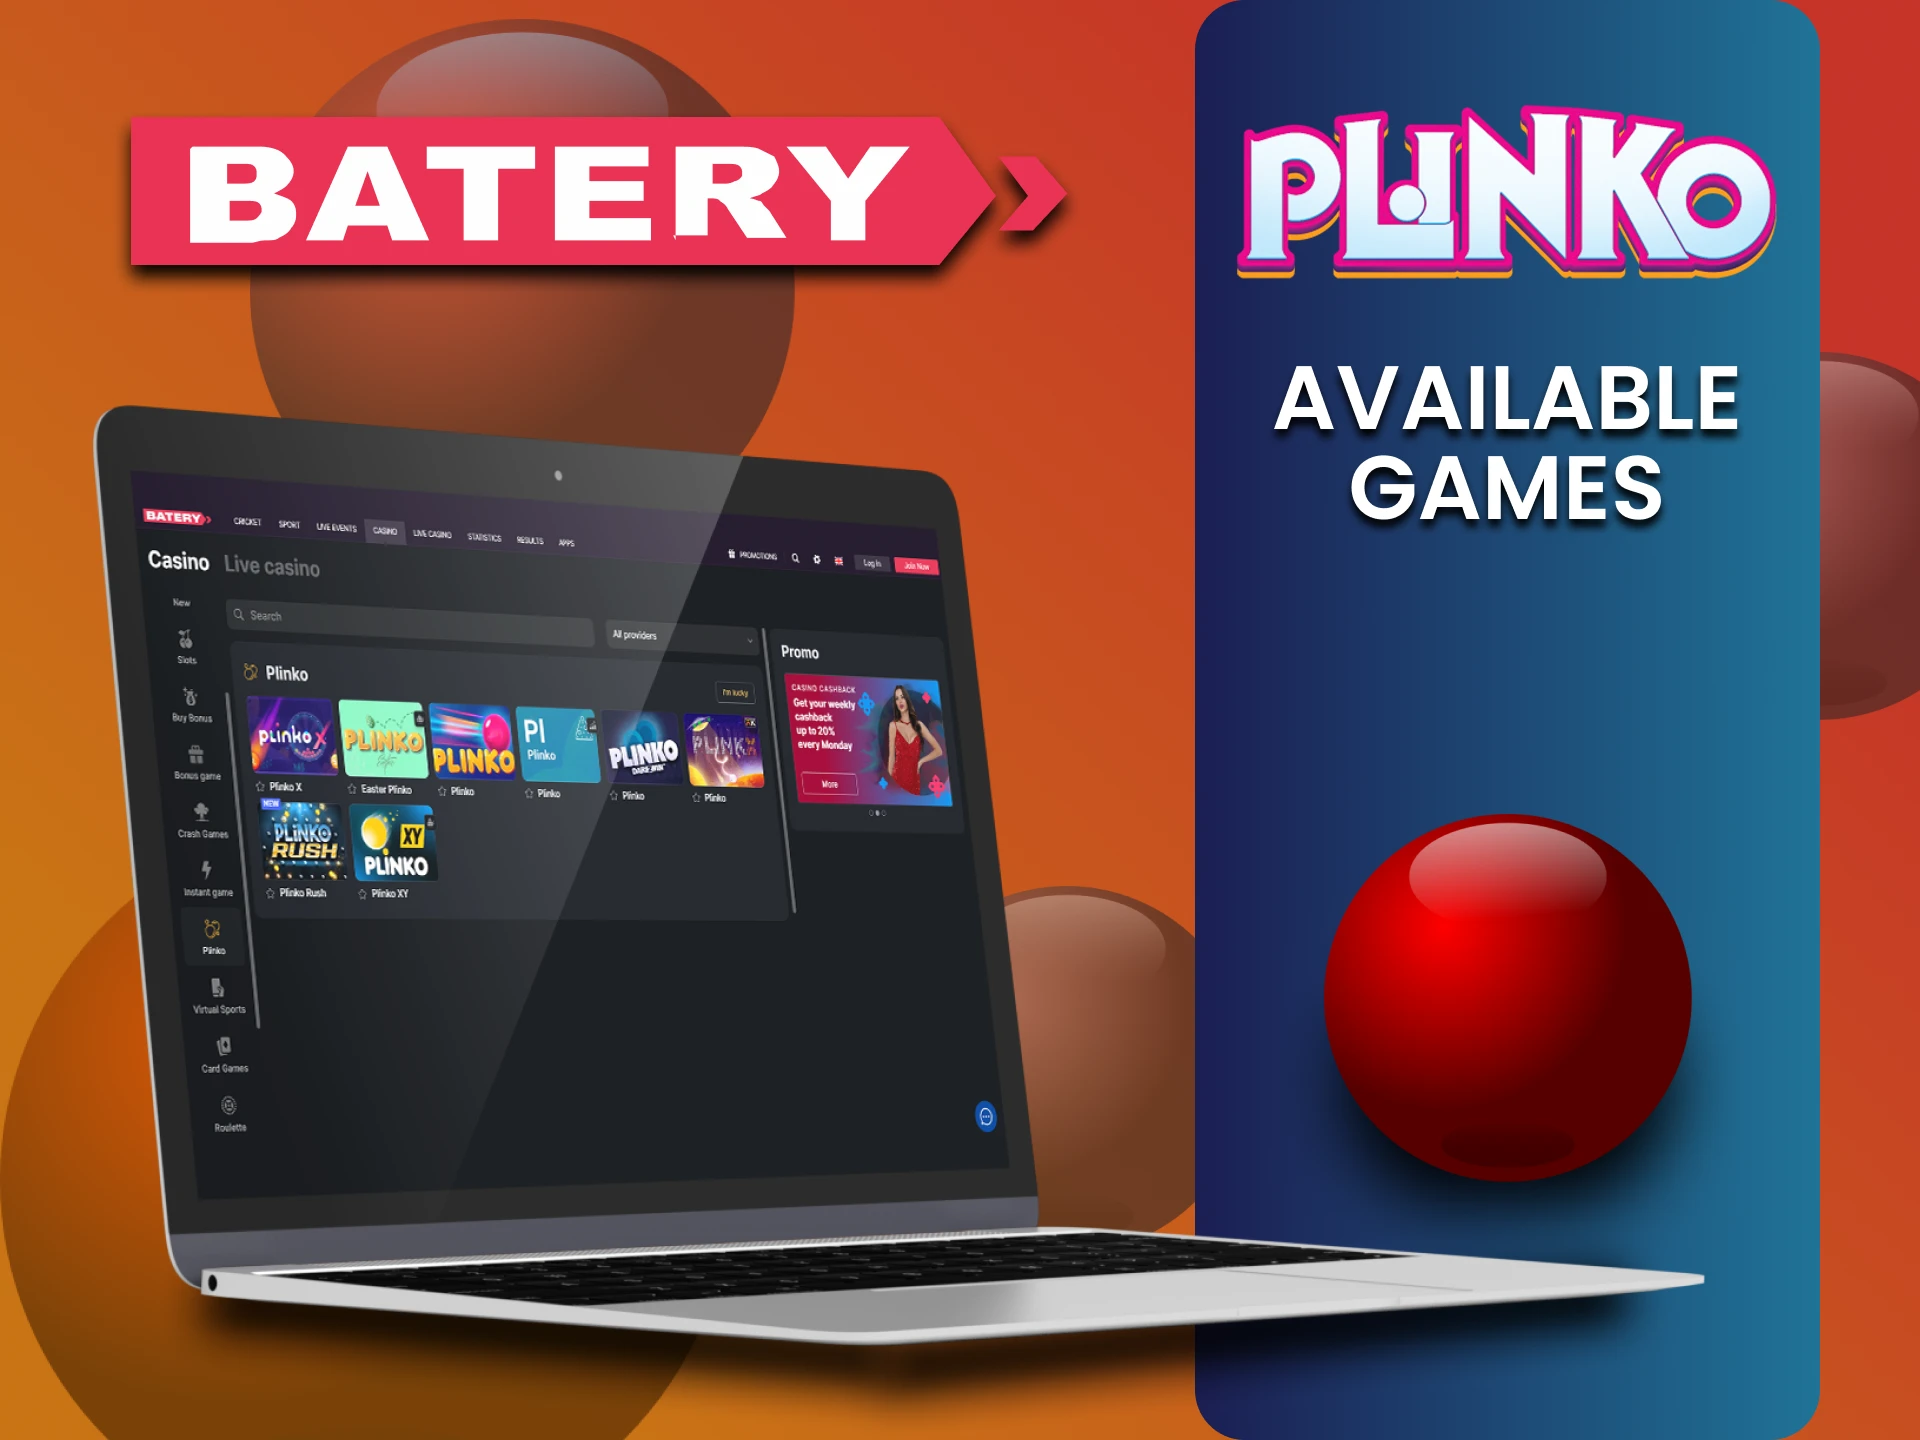 Check out the list of Plinko games on the Batery website.